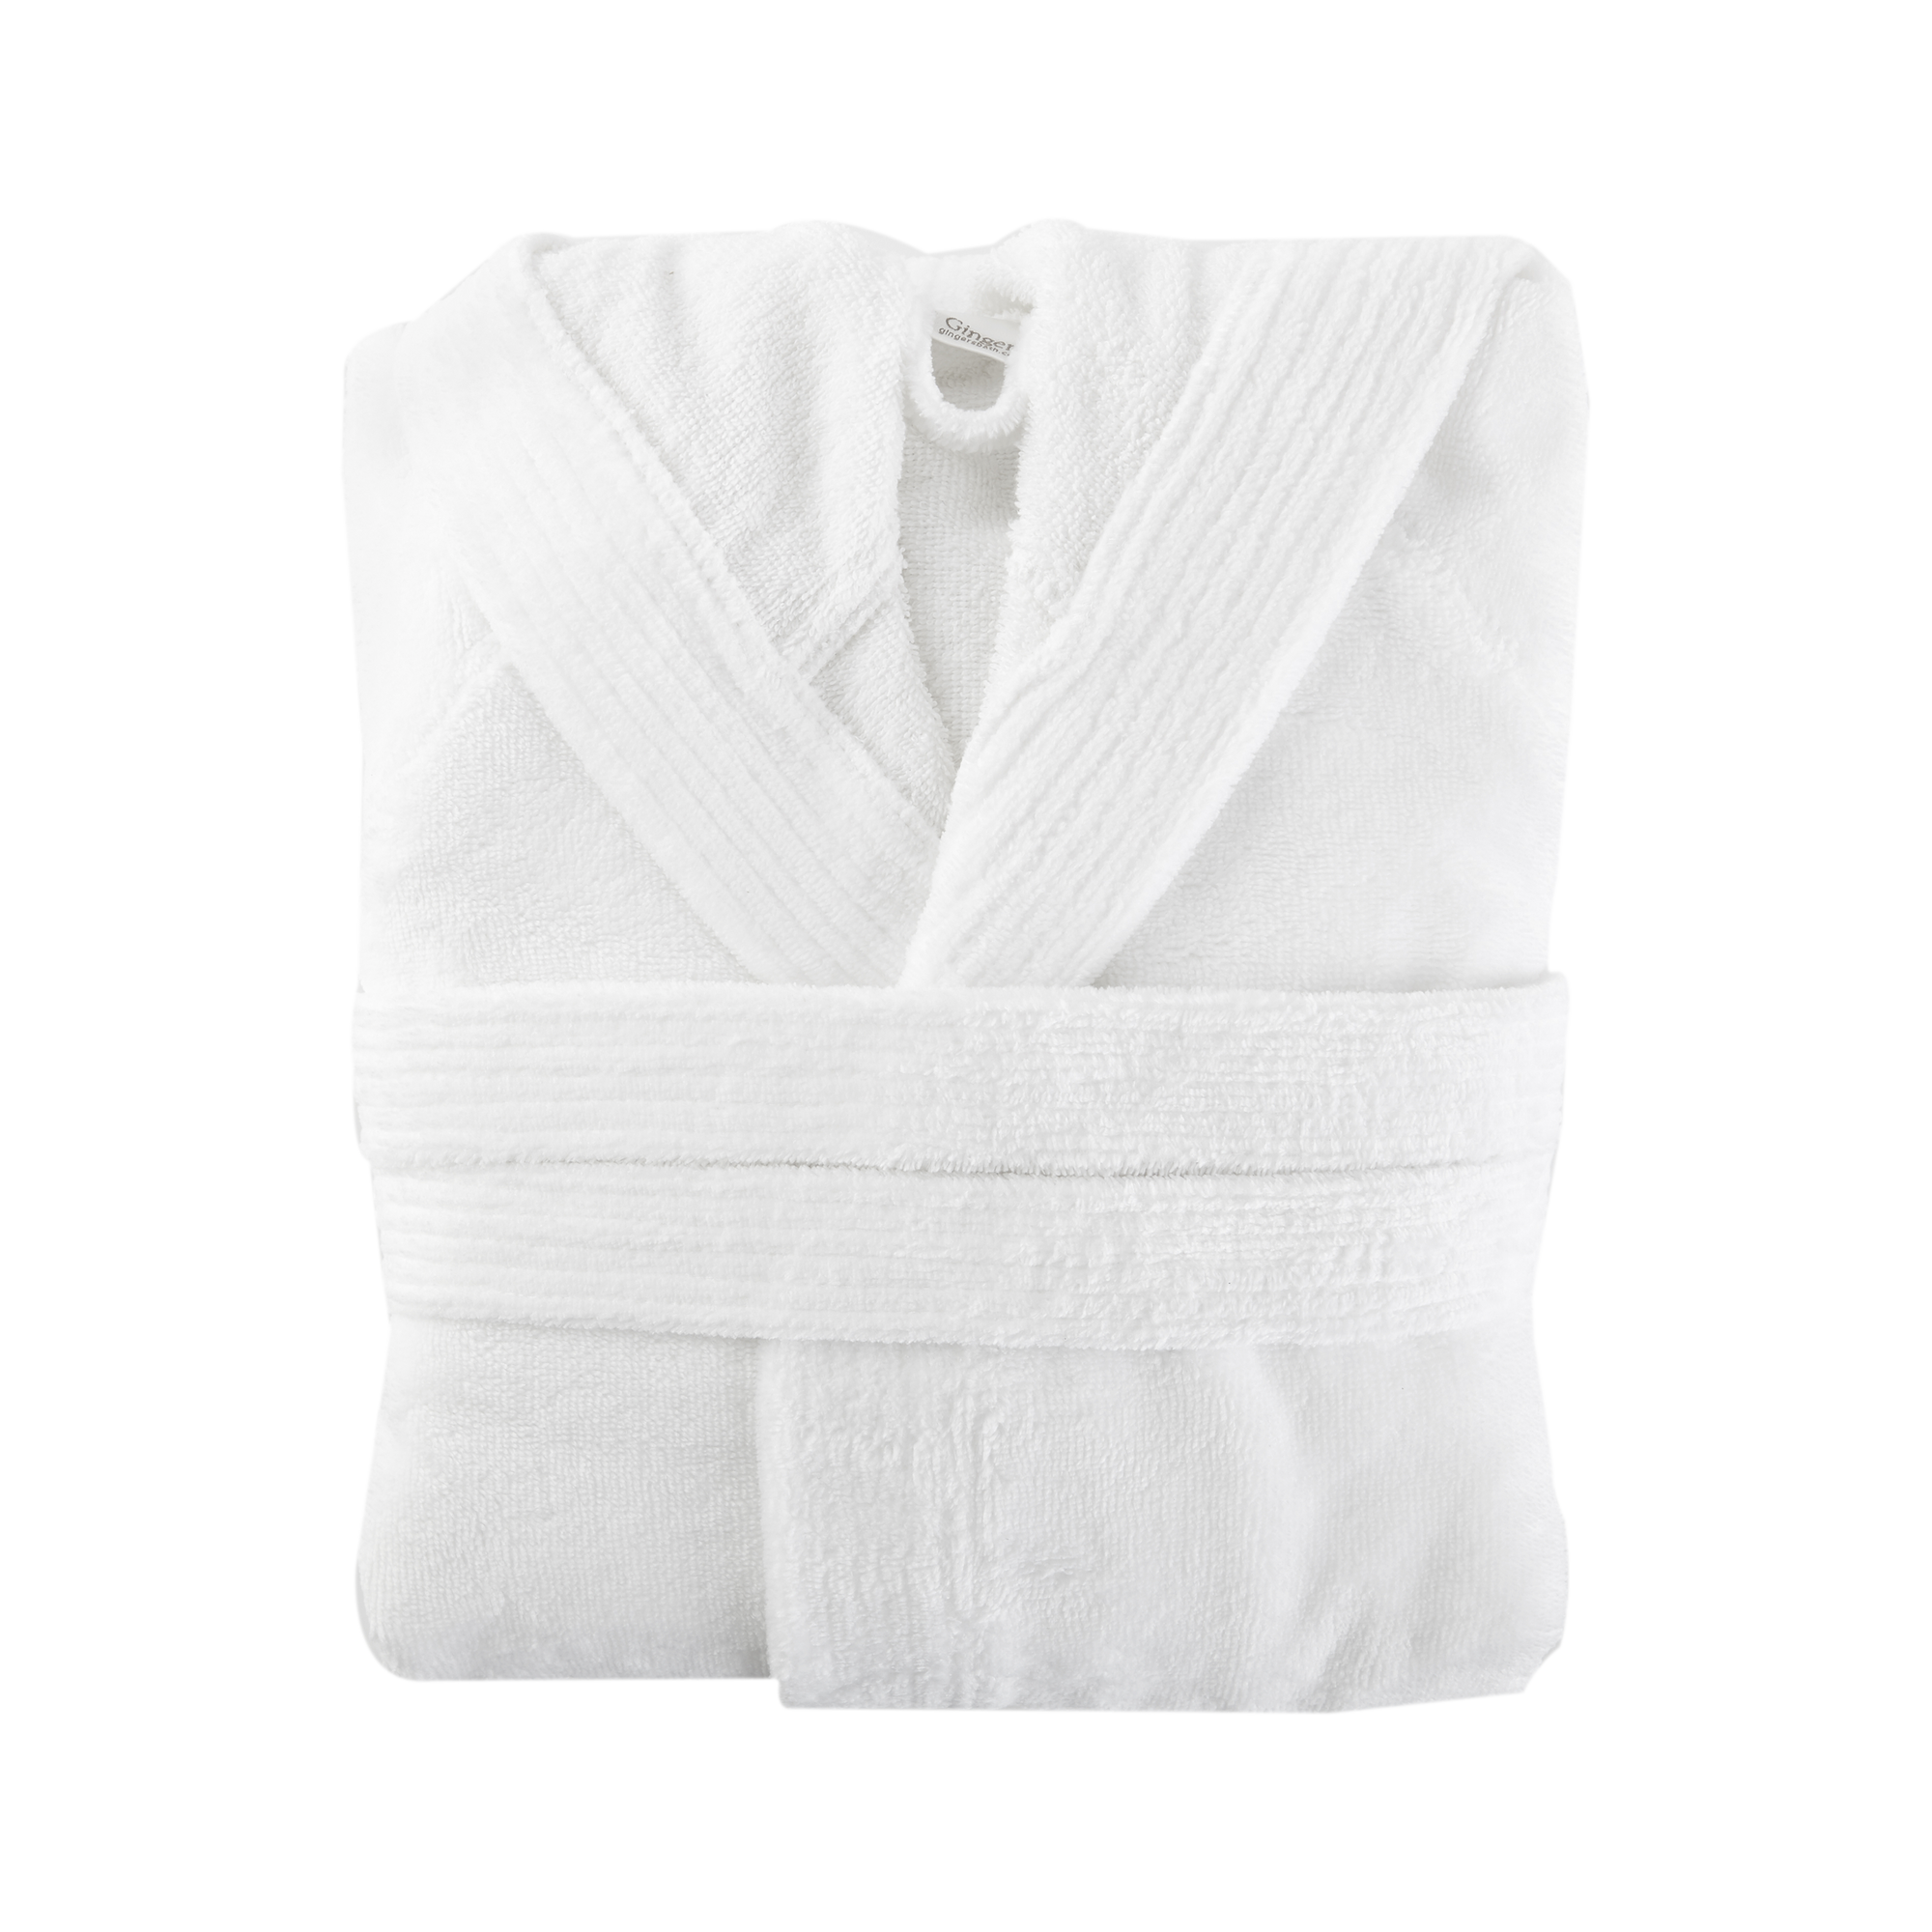 A luxurious hooded bathrobe with terry cotton lining.